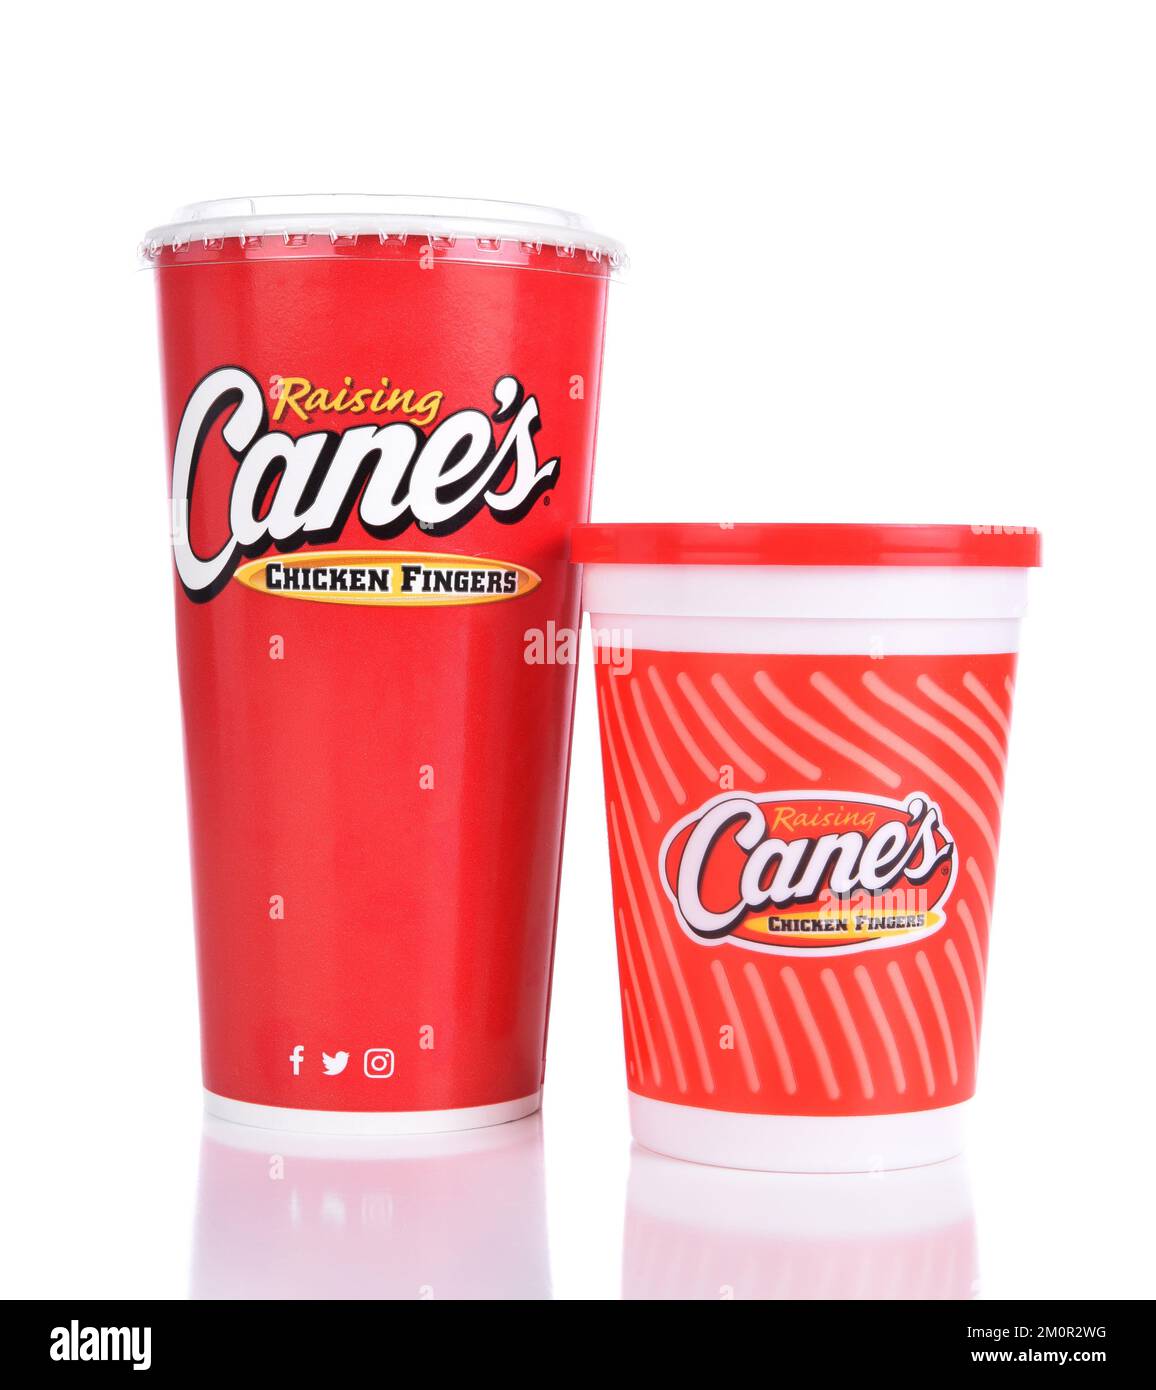 IRVINE, CALIFORNIA - AUGUST 22, 2017:  Raising Canes Drink Cups. Raising Canes ia a fast food restaurant chain specializing in Chicken Finger meals. Stock Photo